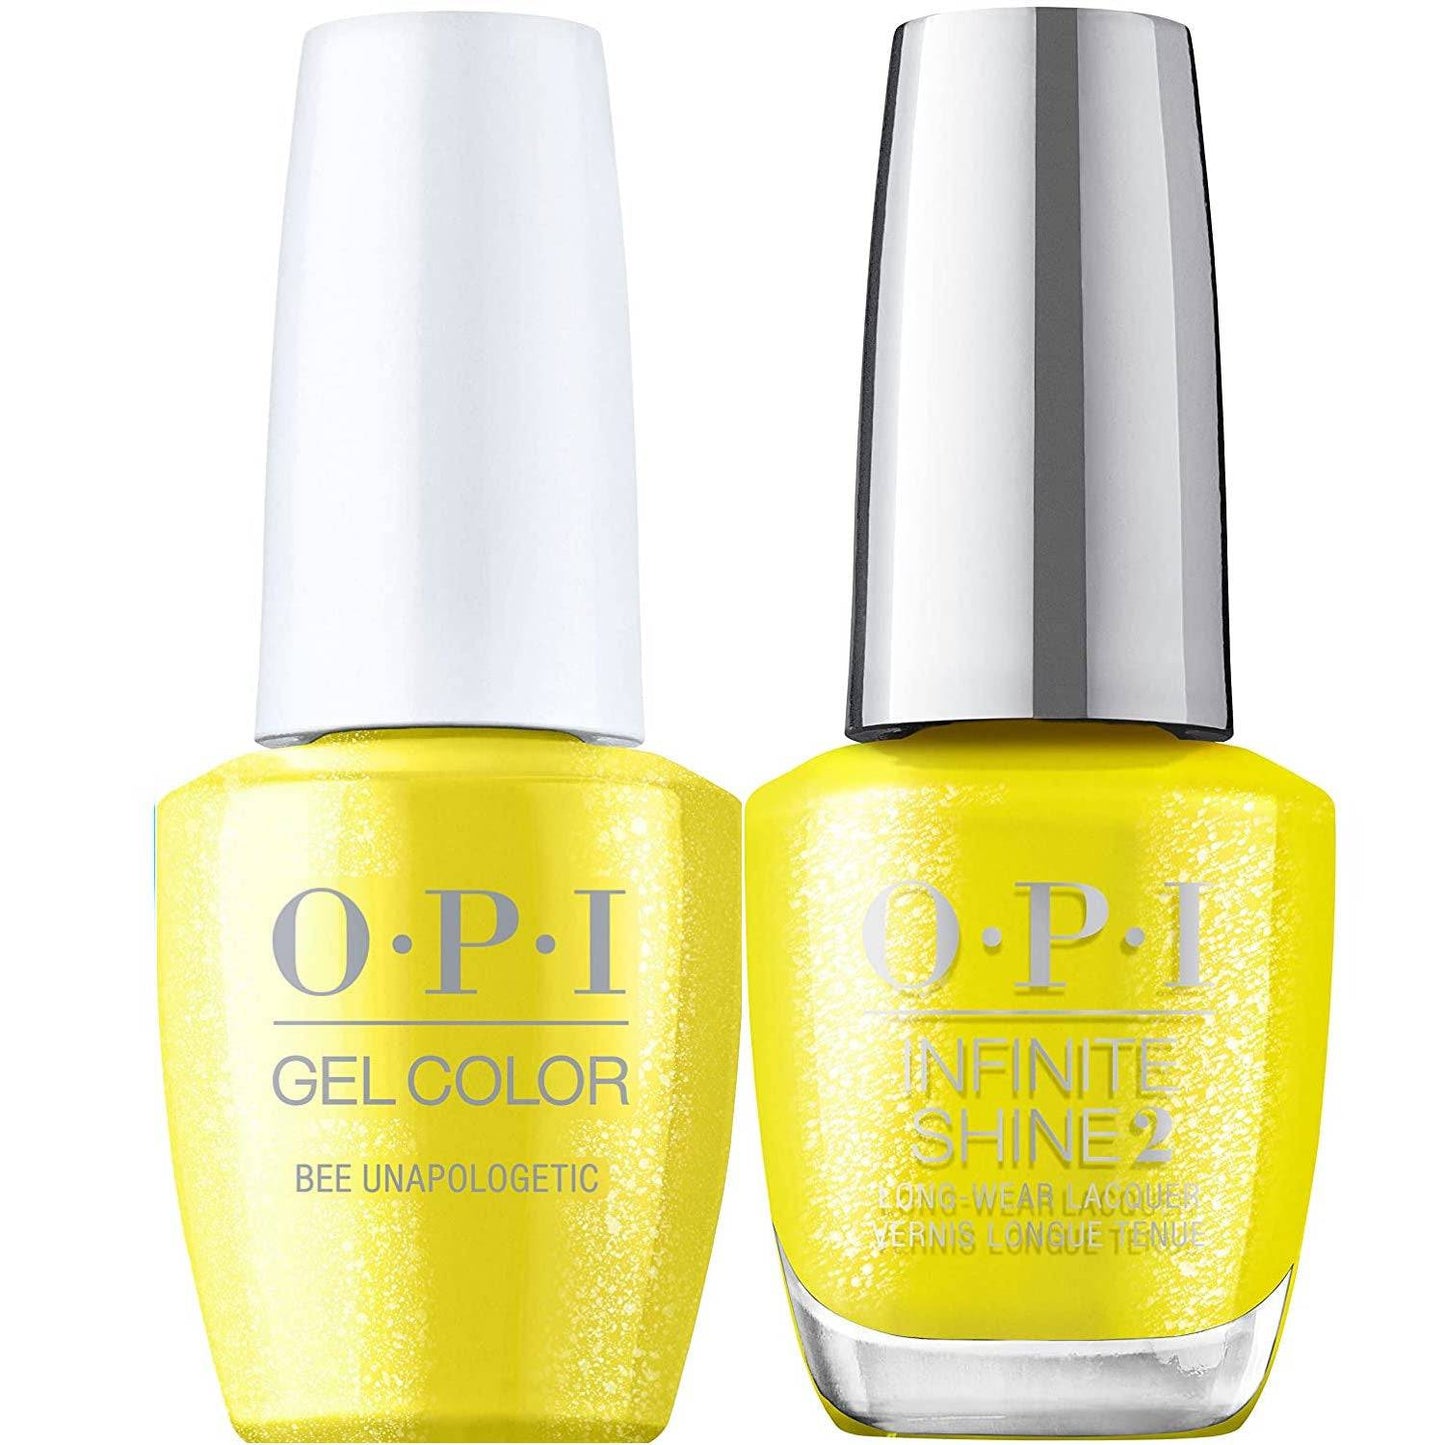 OPI GelColor + Infinite Shine Bee Unapologetic #B010 (Discontinued) - Universal Nail Supplies